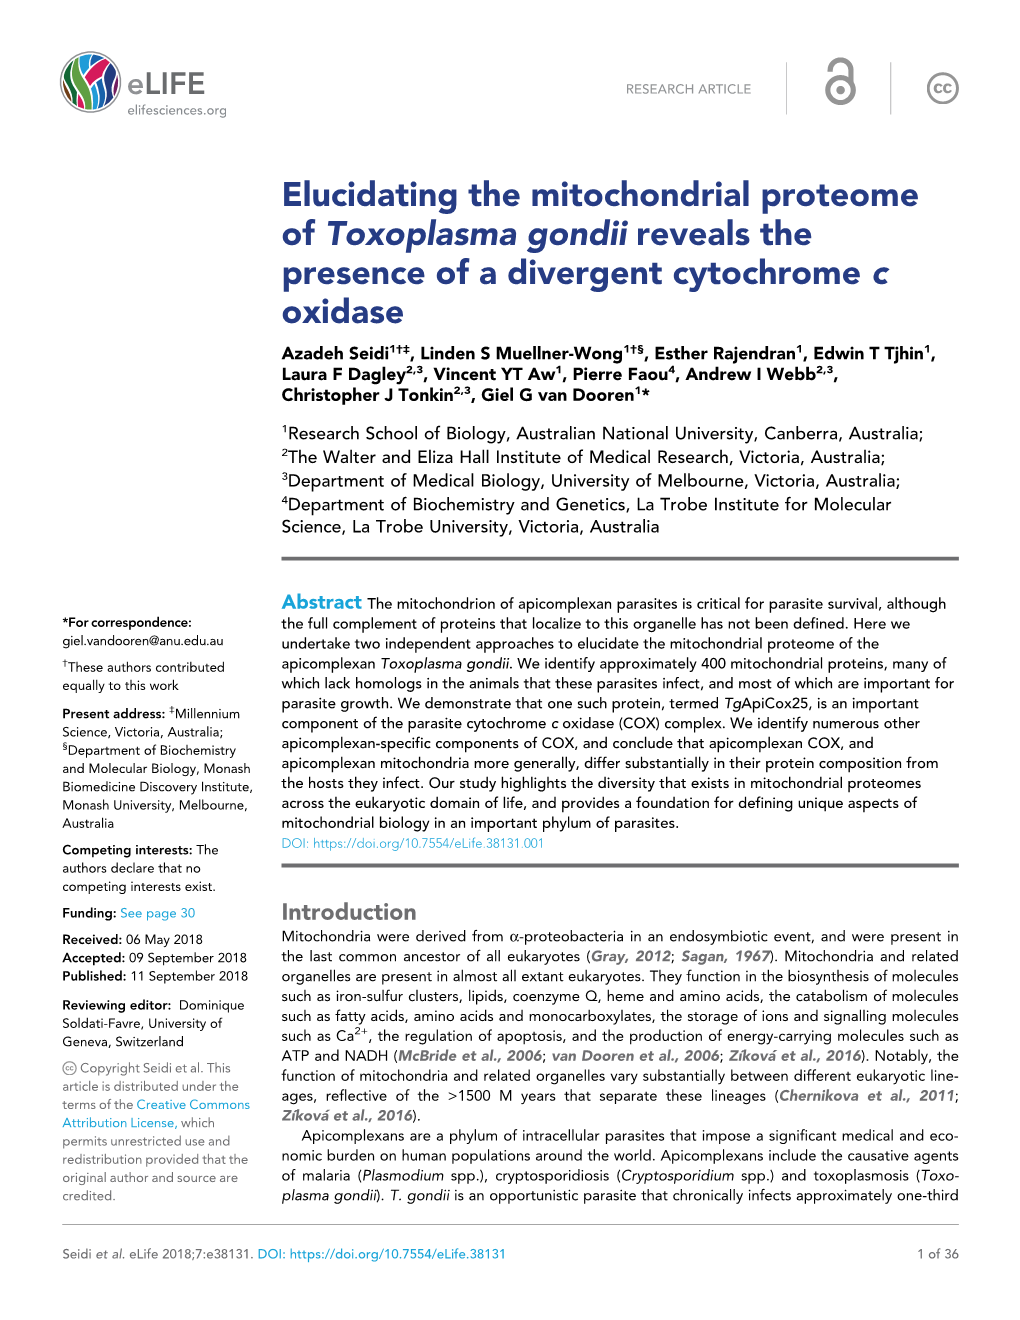 Elucidating the Mitochondrial Proteome of Toxoplasma Gondii